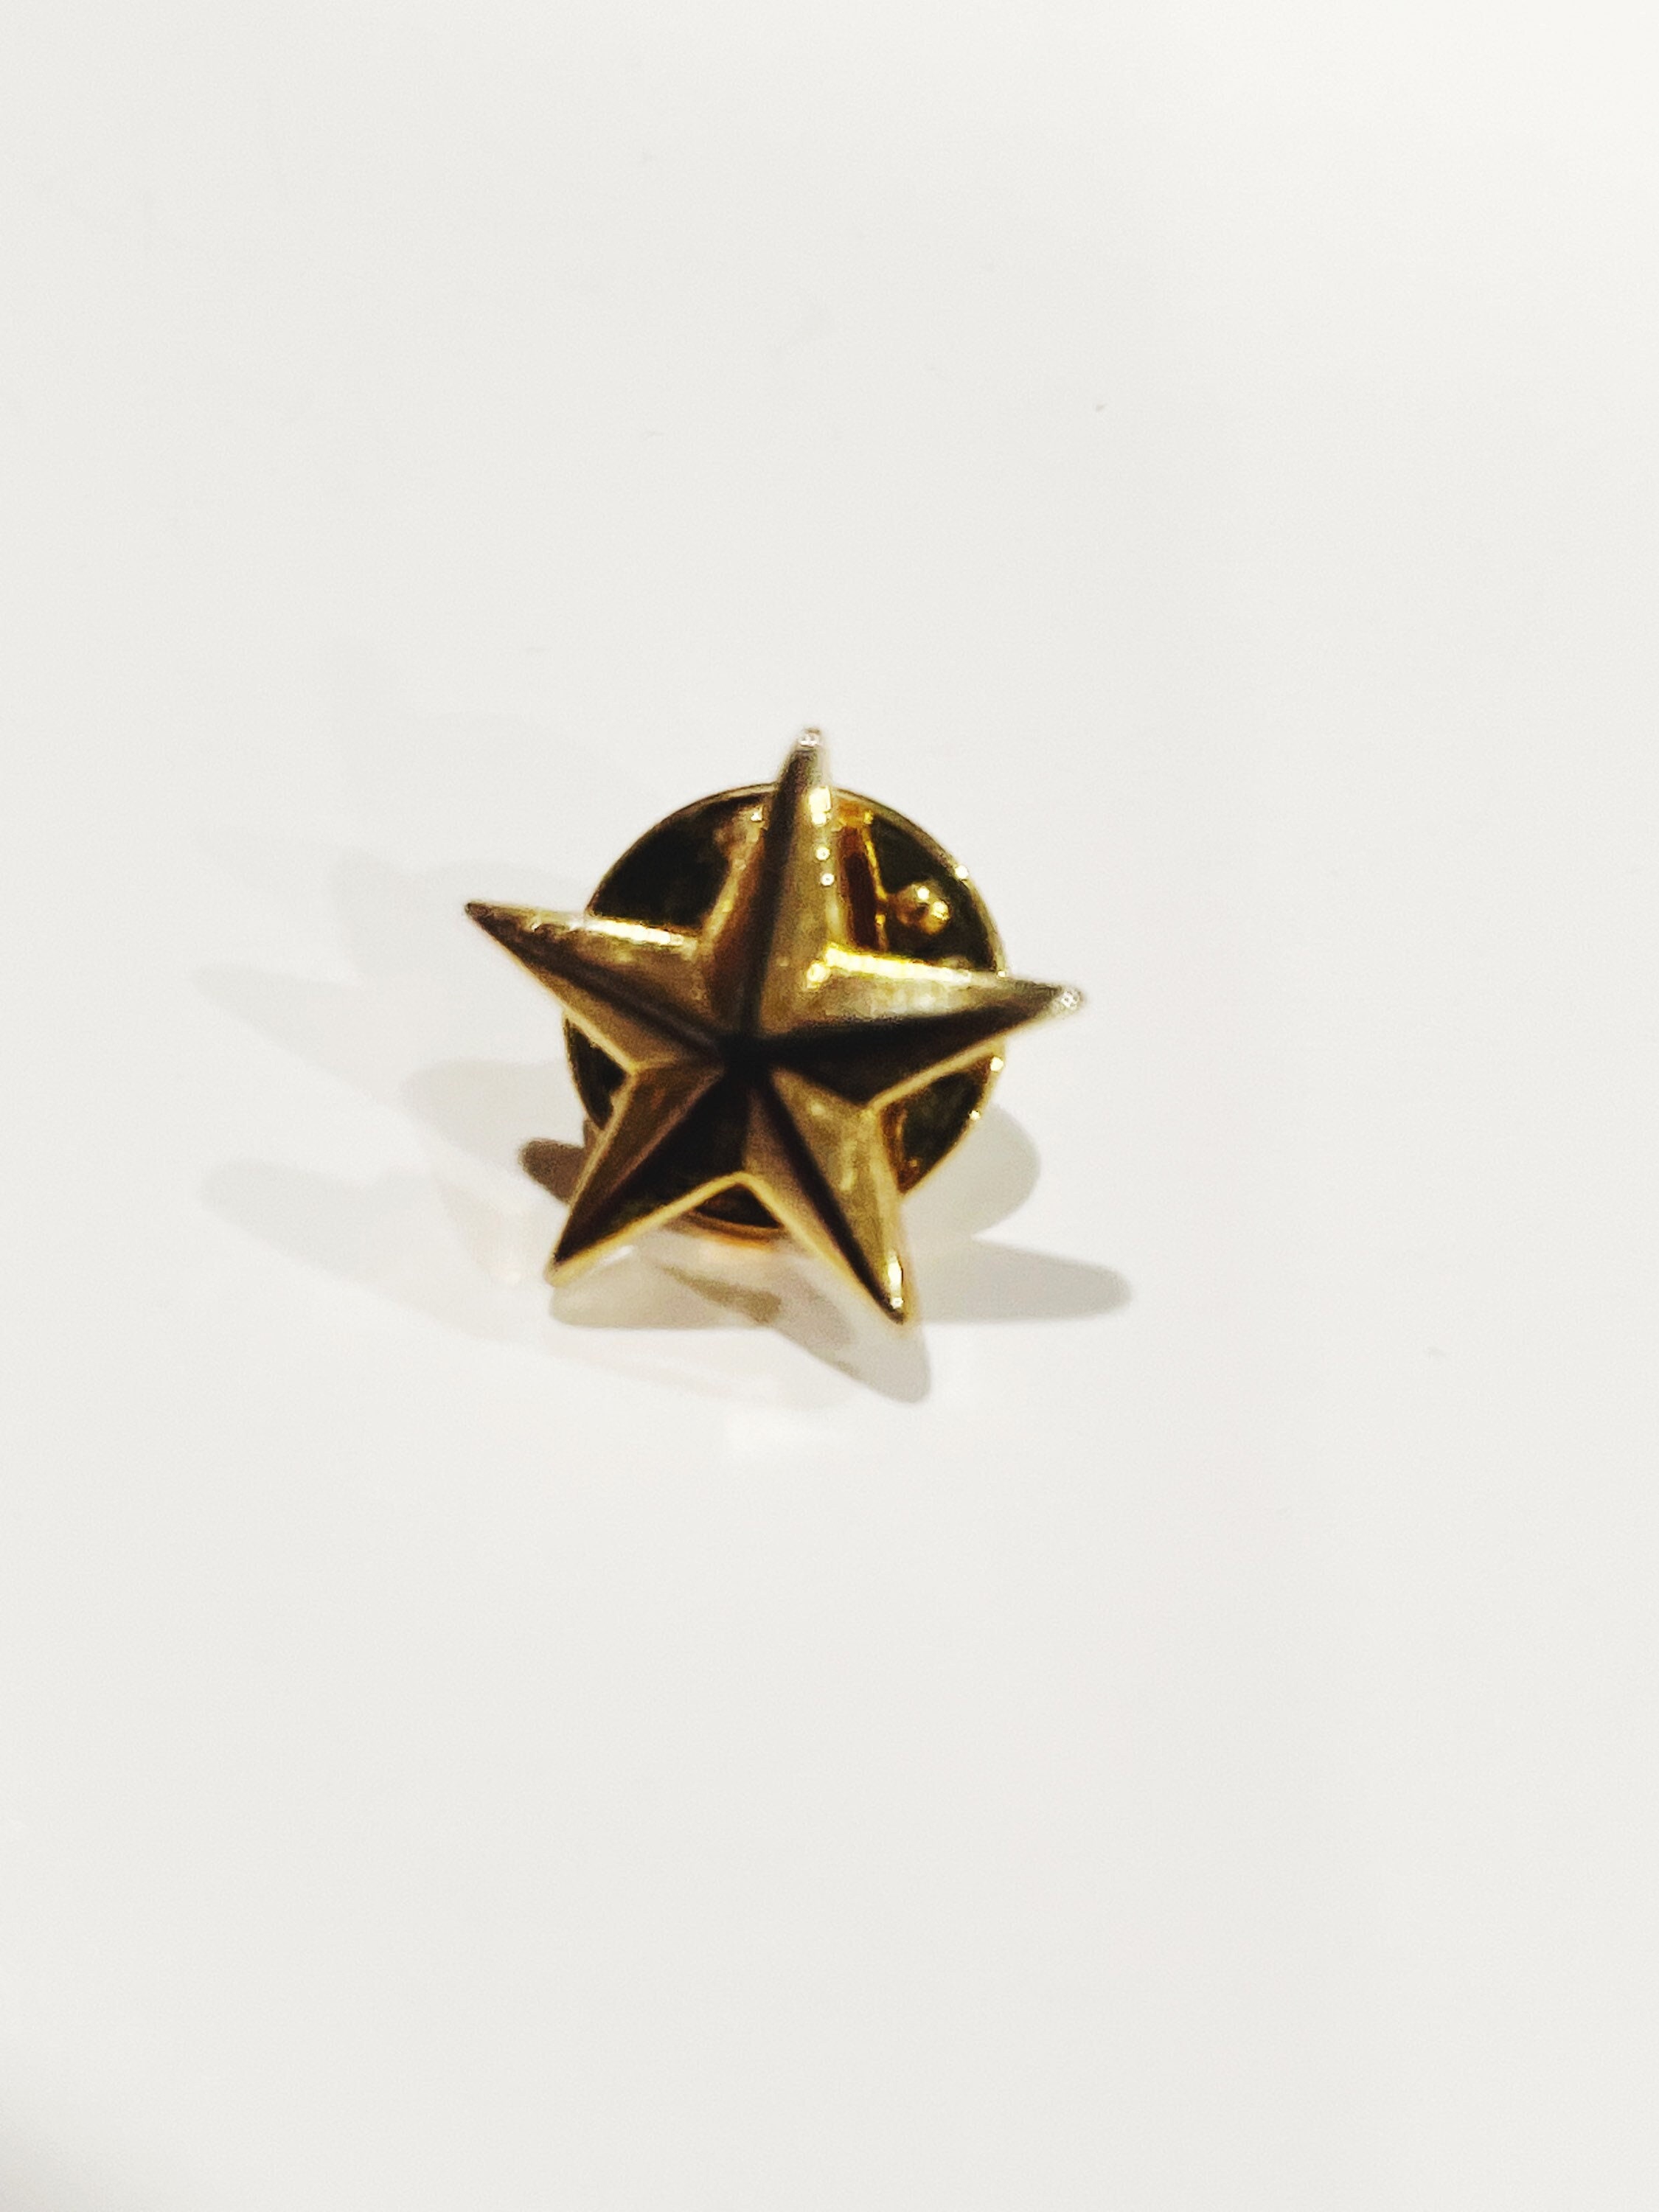 60 Pieces Star Badge Lapel Pin Veterans Day Star Pins for Backpacks Star Badge  Pins Military Award Pins Labor Day 4th of July Memorial Day Stars Brooches  Gold